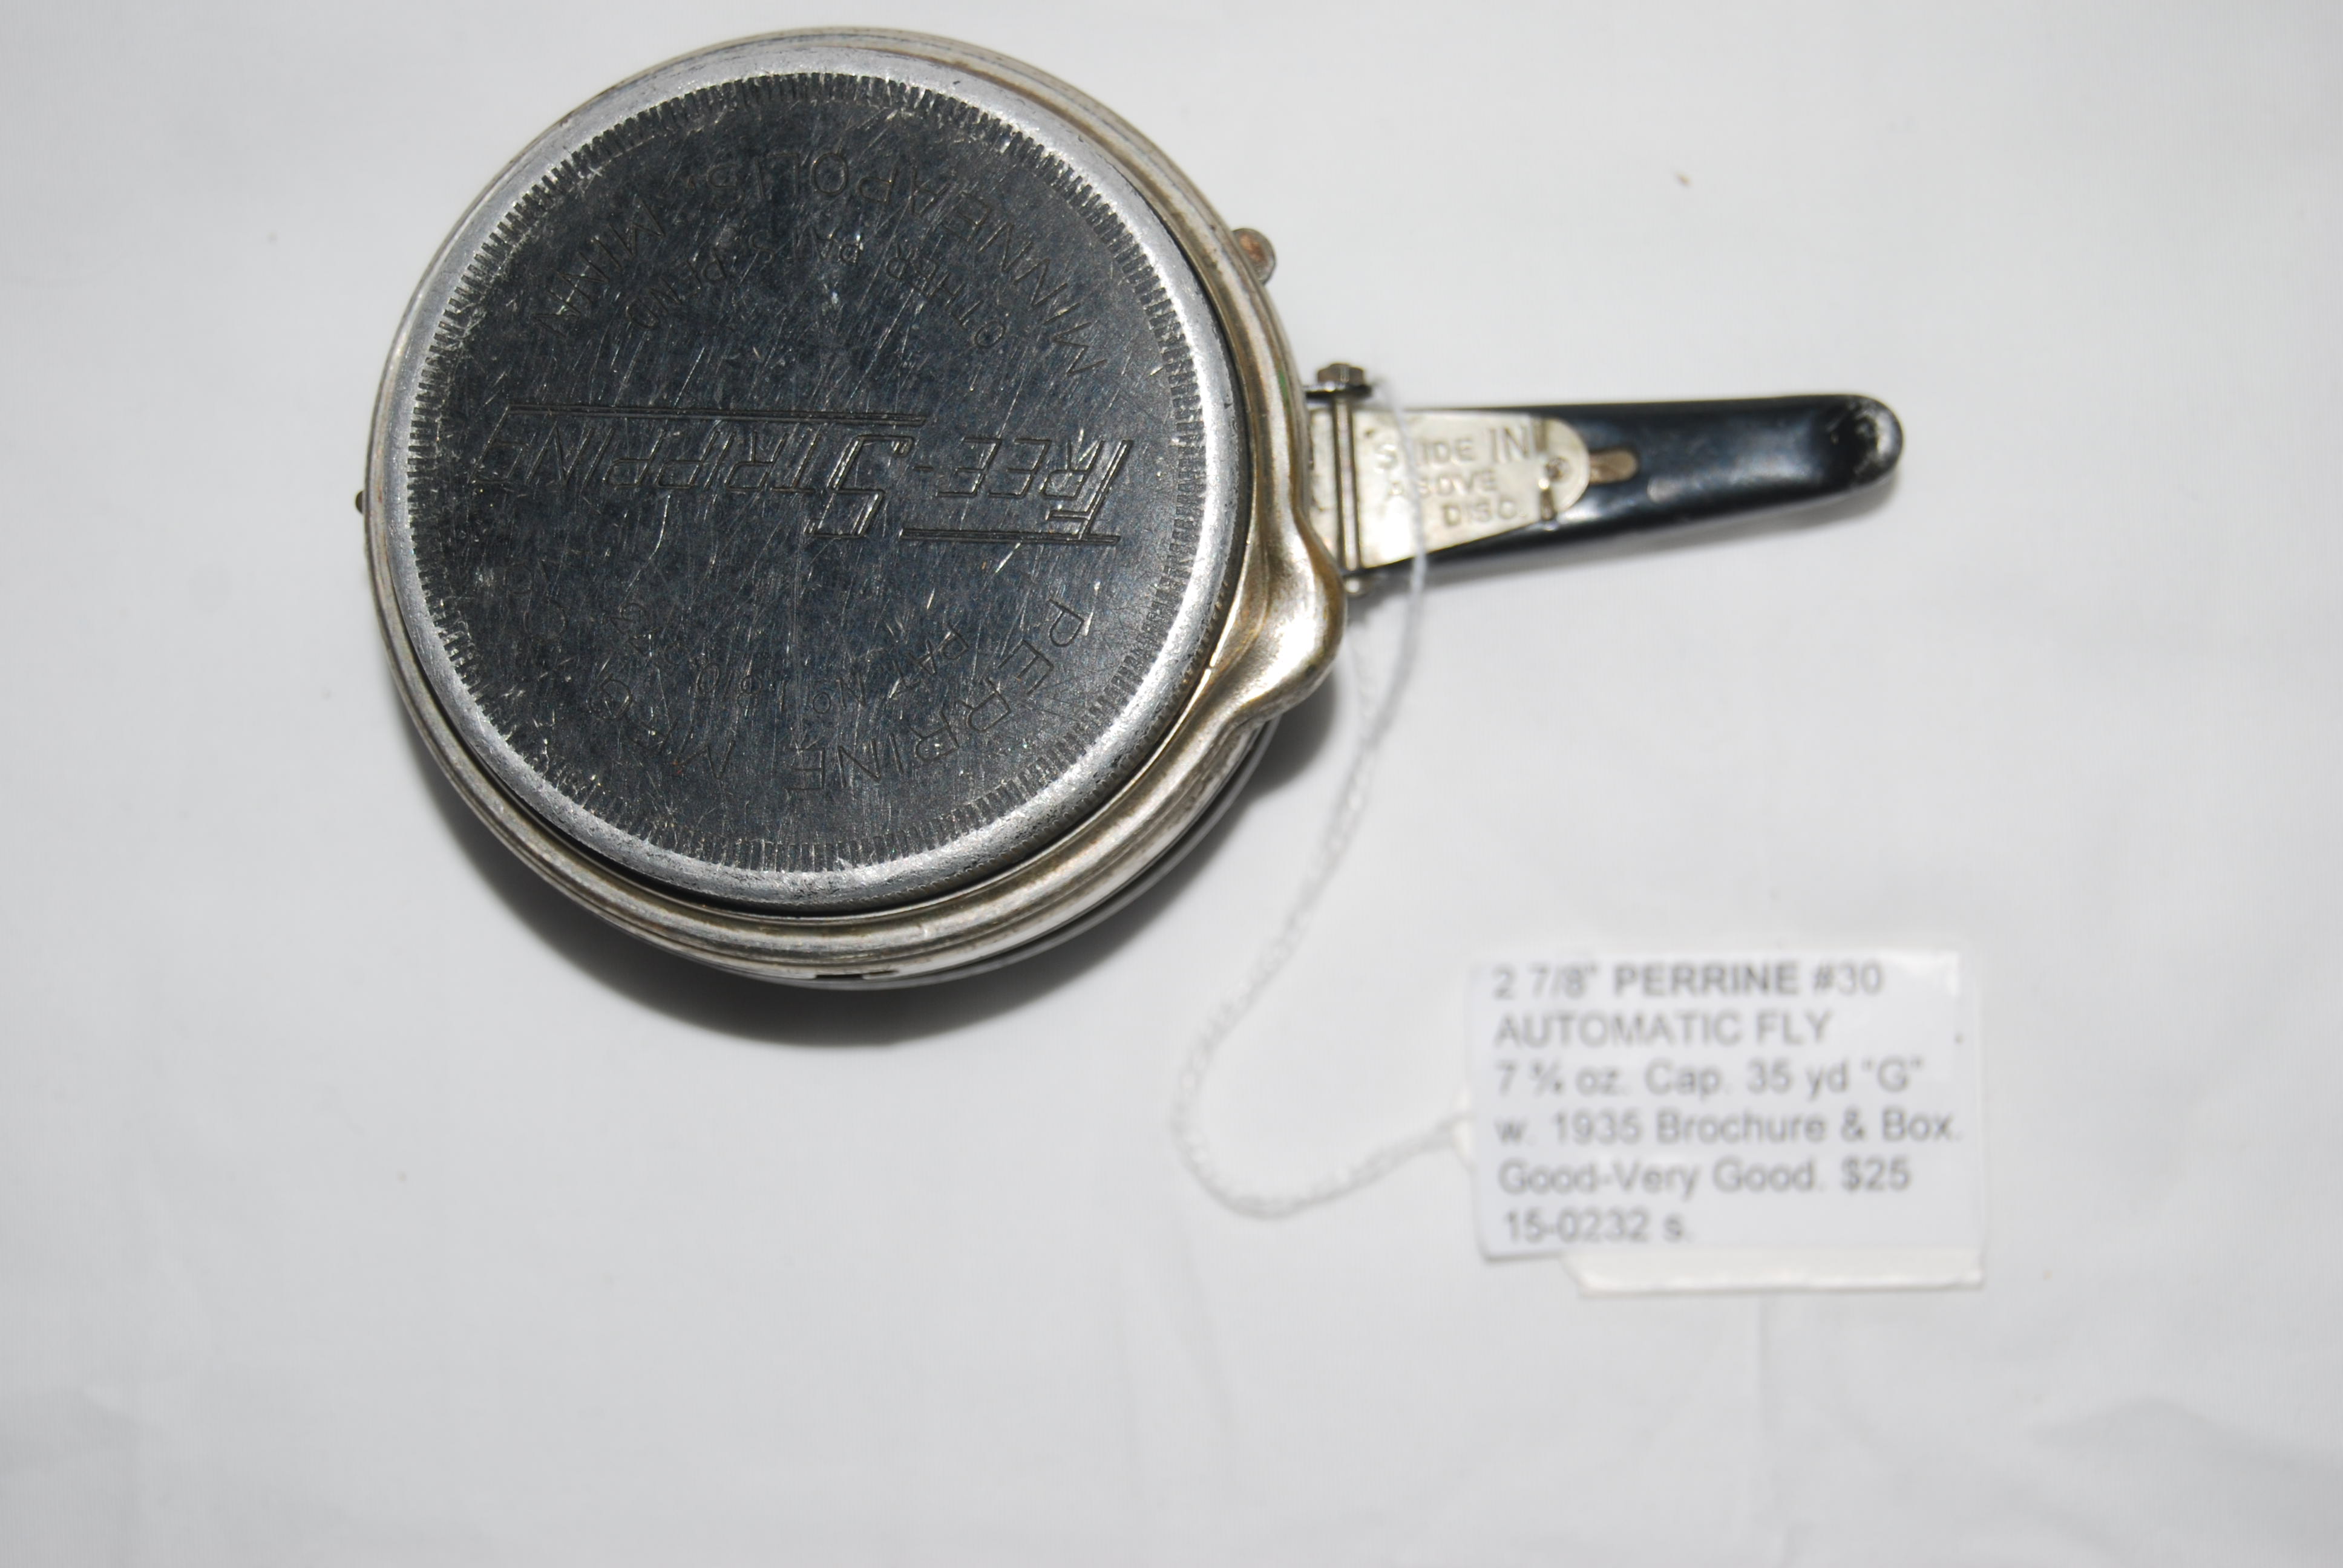 2 7/8” PERRINE NO. 30 FREE STRIPPING AUTOMATIC FLY REEL. 7 ¾ oz. Capacity  35 yd. “G” line. In original Box with Perrine Circular No. 40 dated May